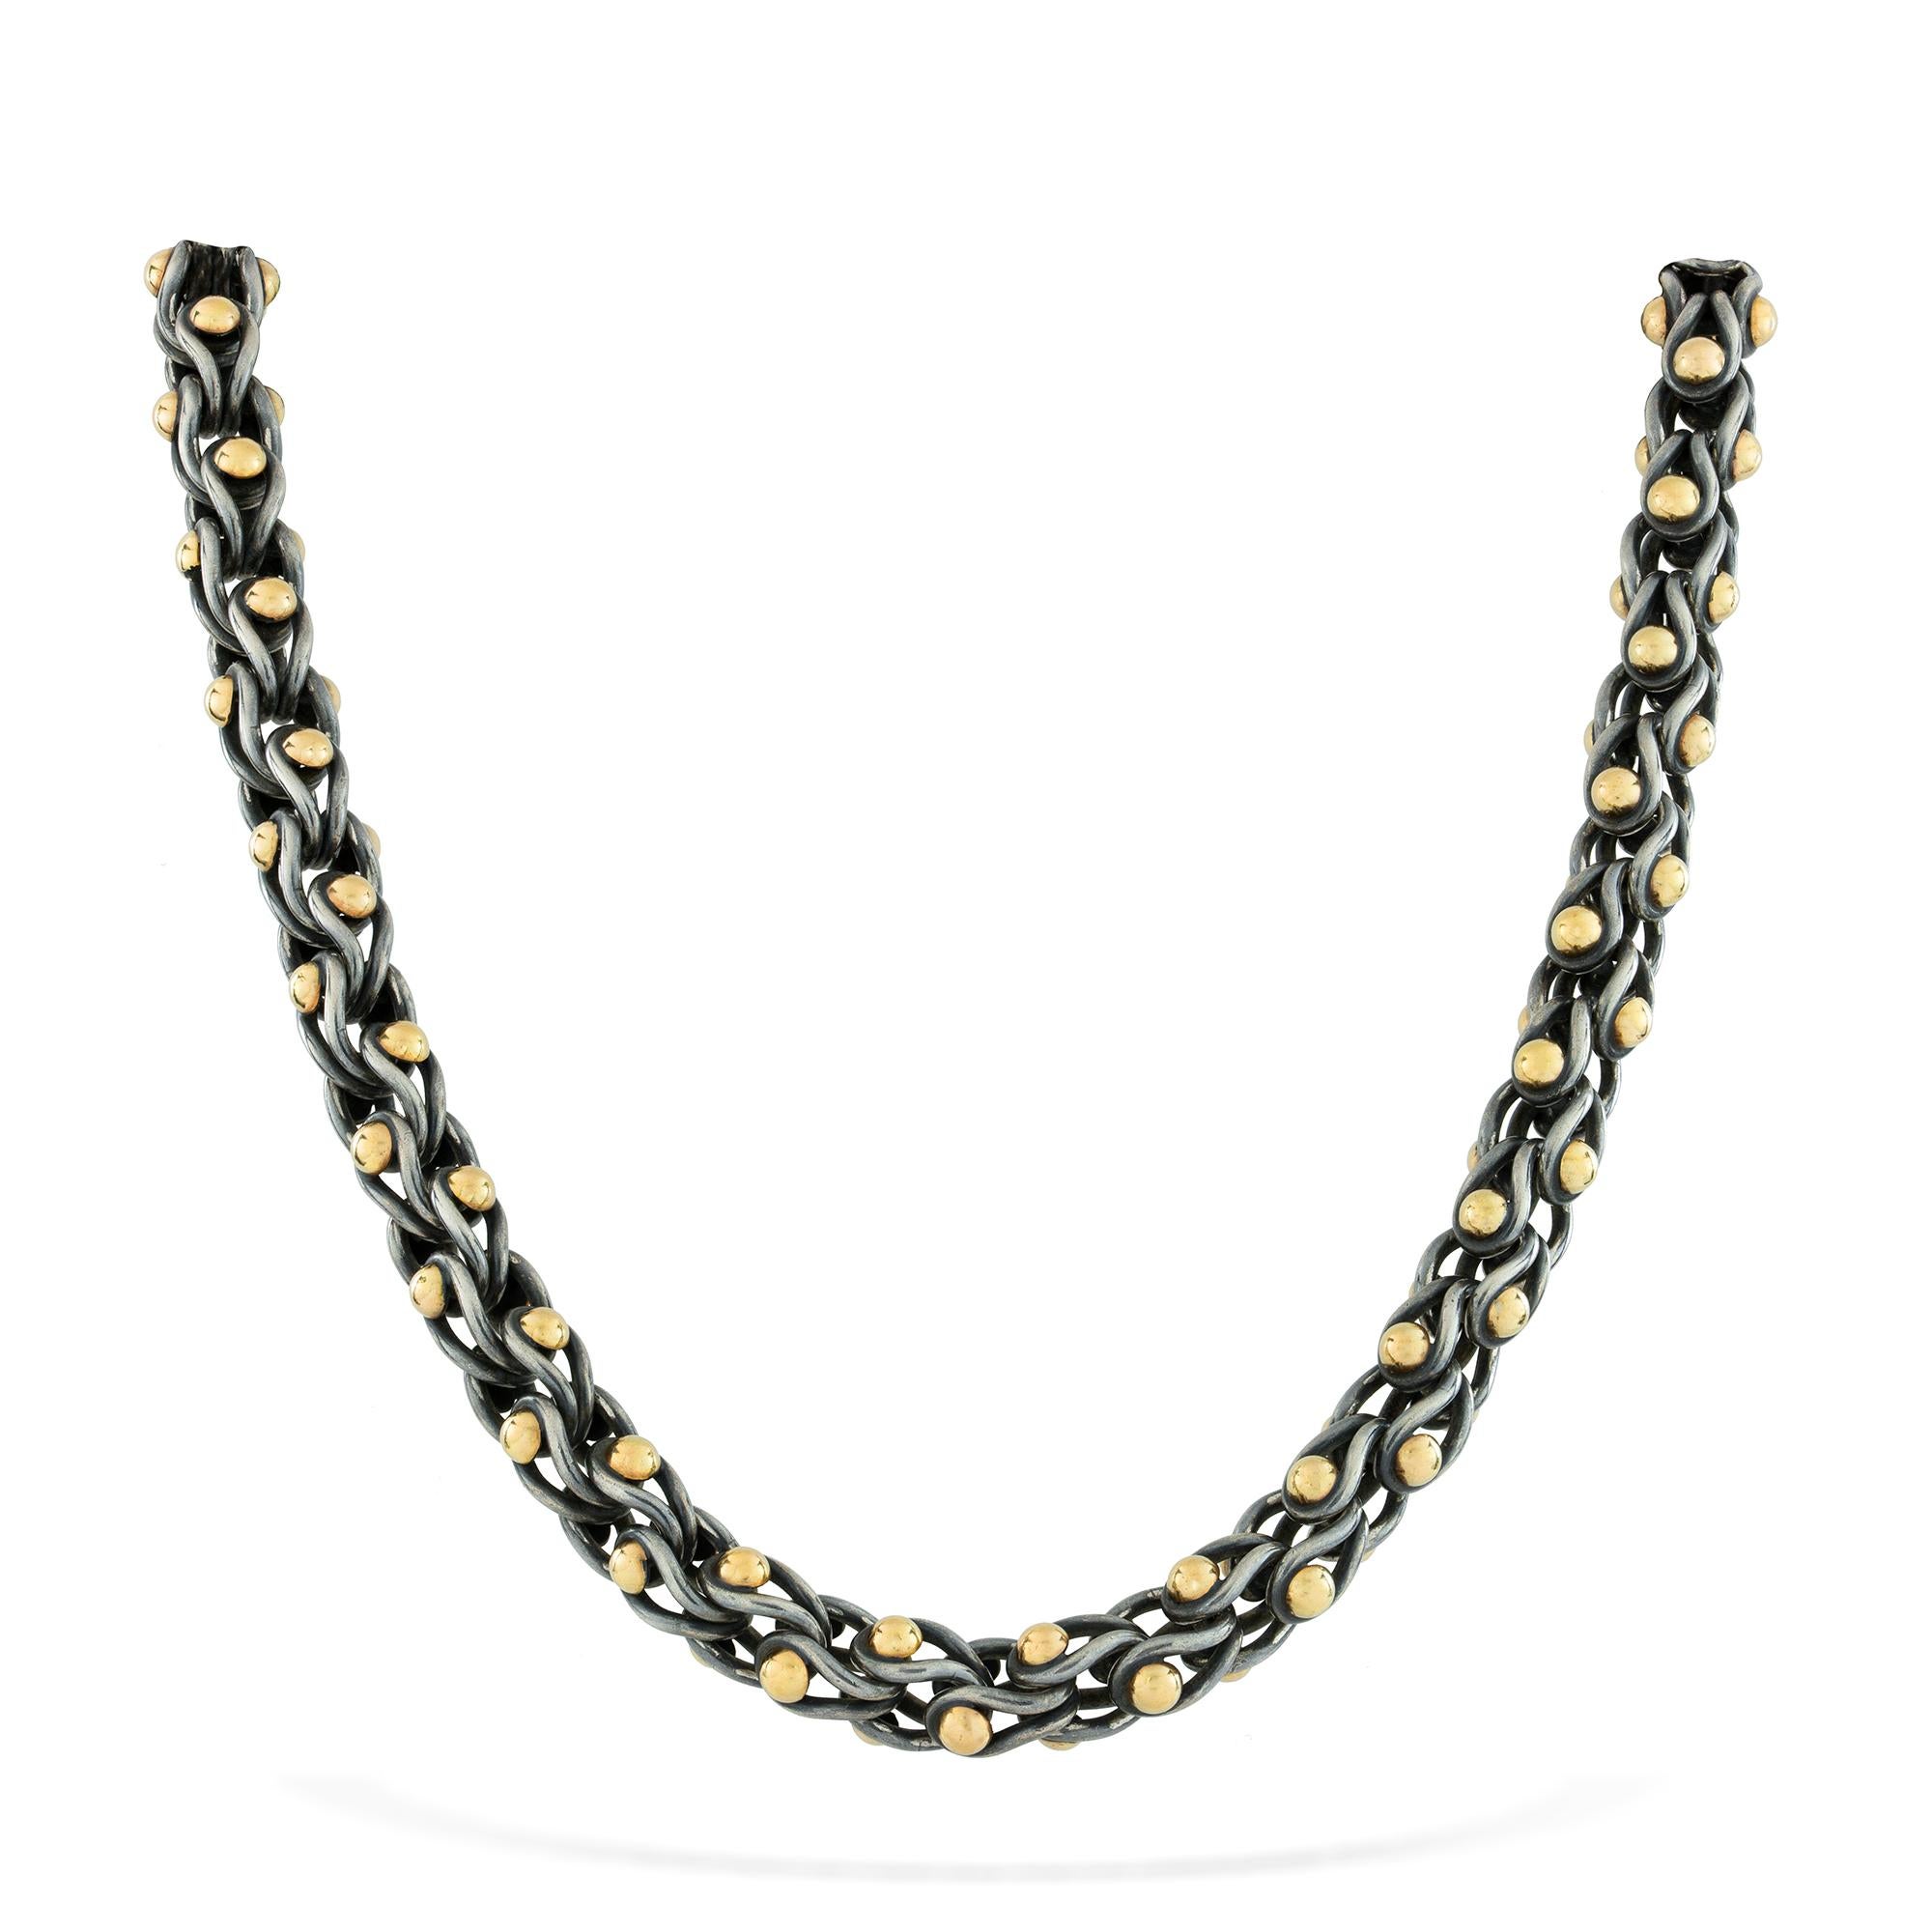 A black water ballet necklace, the sixty-eight U-shaped silver links in the form of a drop , each with two yellow gold hemispheres, handmade by Lucie Heskett-Brem the Gold Weaver of Lucerne, to a magnetic hidden clasp, hallmarked 18ct gold and